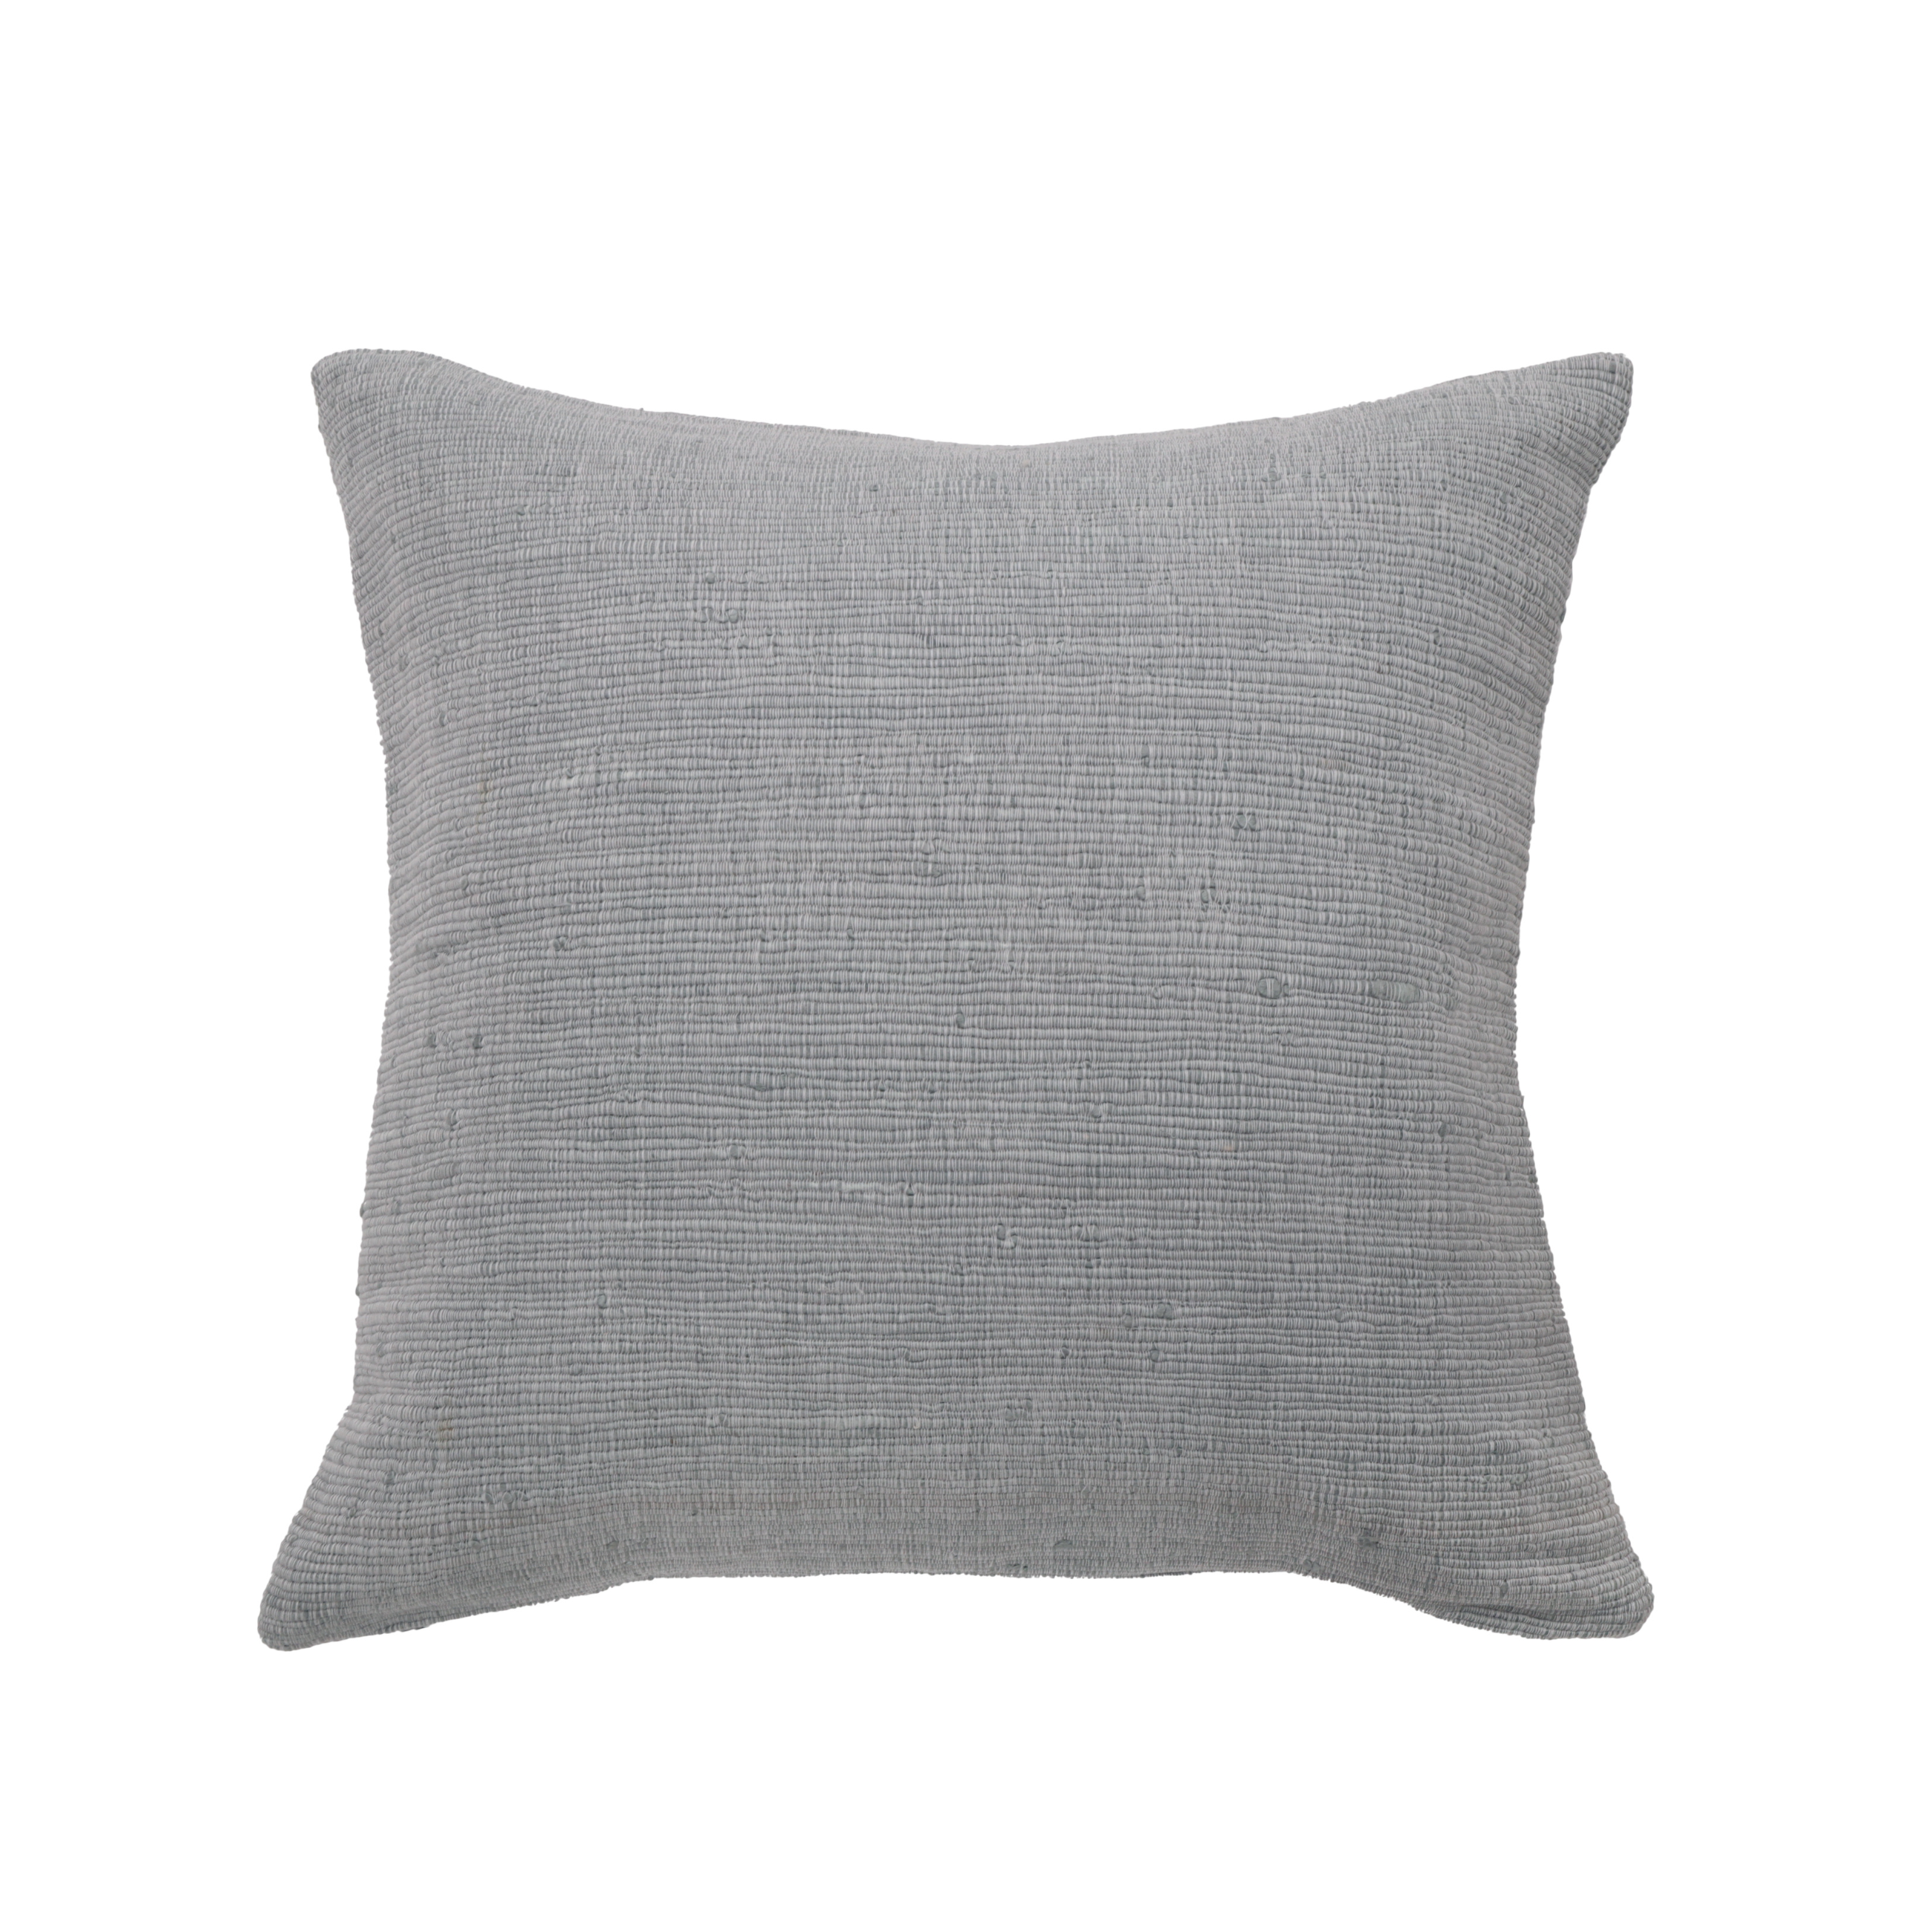 pompom at home - athena - pillow with insert - shore blue color